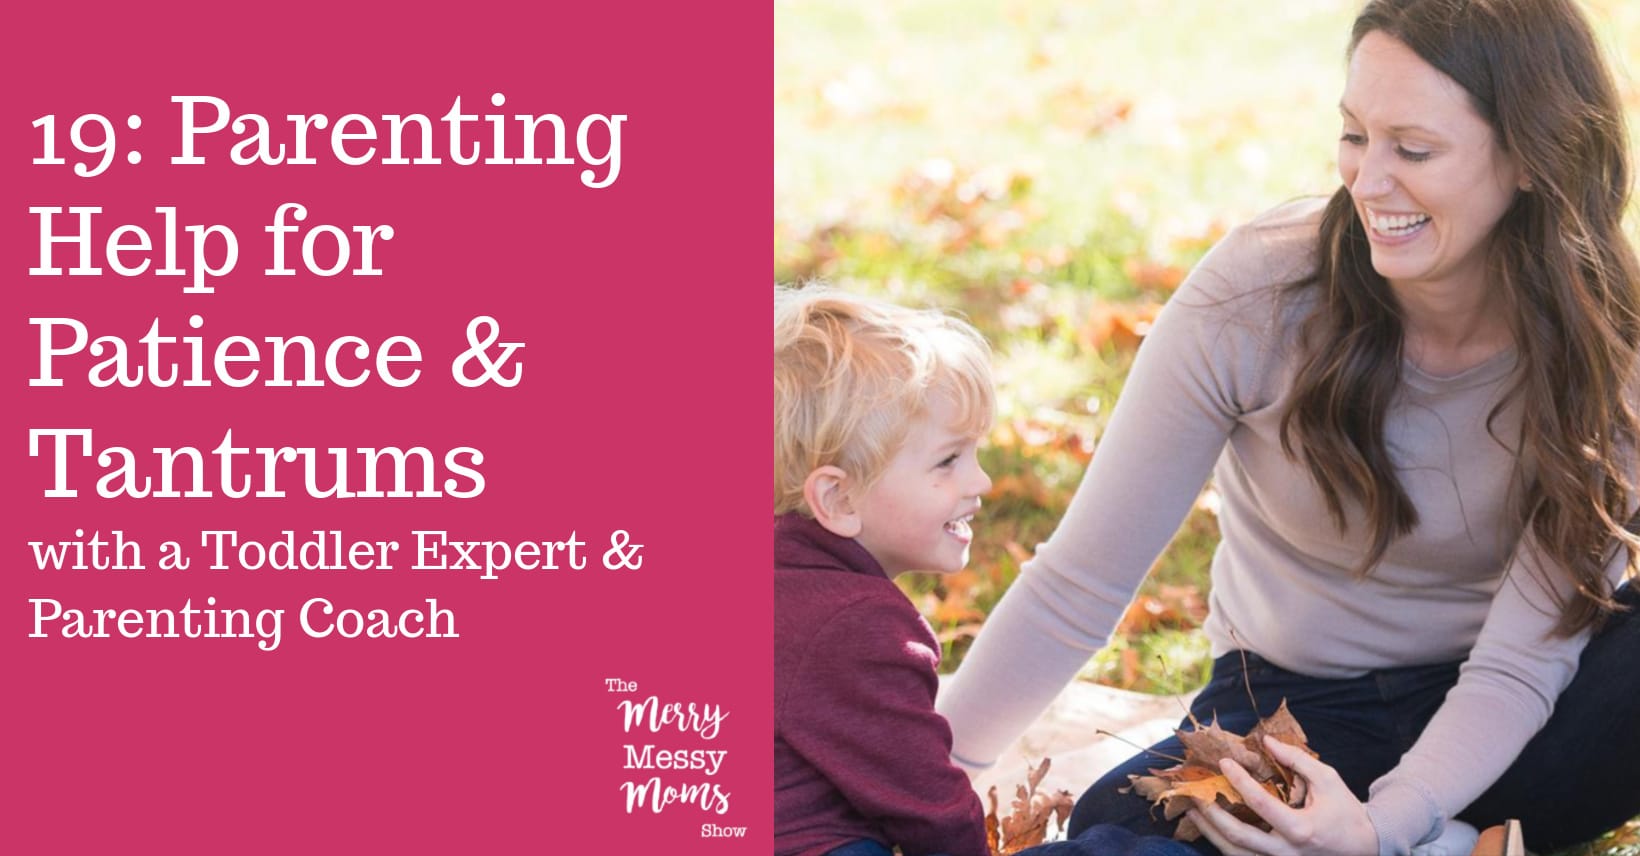 Parenting Help for Patience and Toddler Tantrums with a Toddler Expert and Parenting Coach